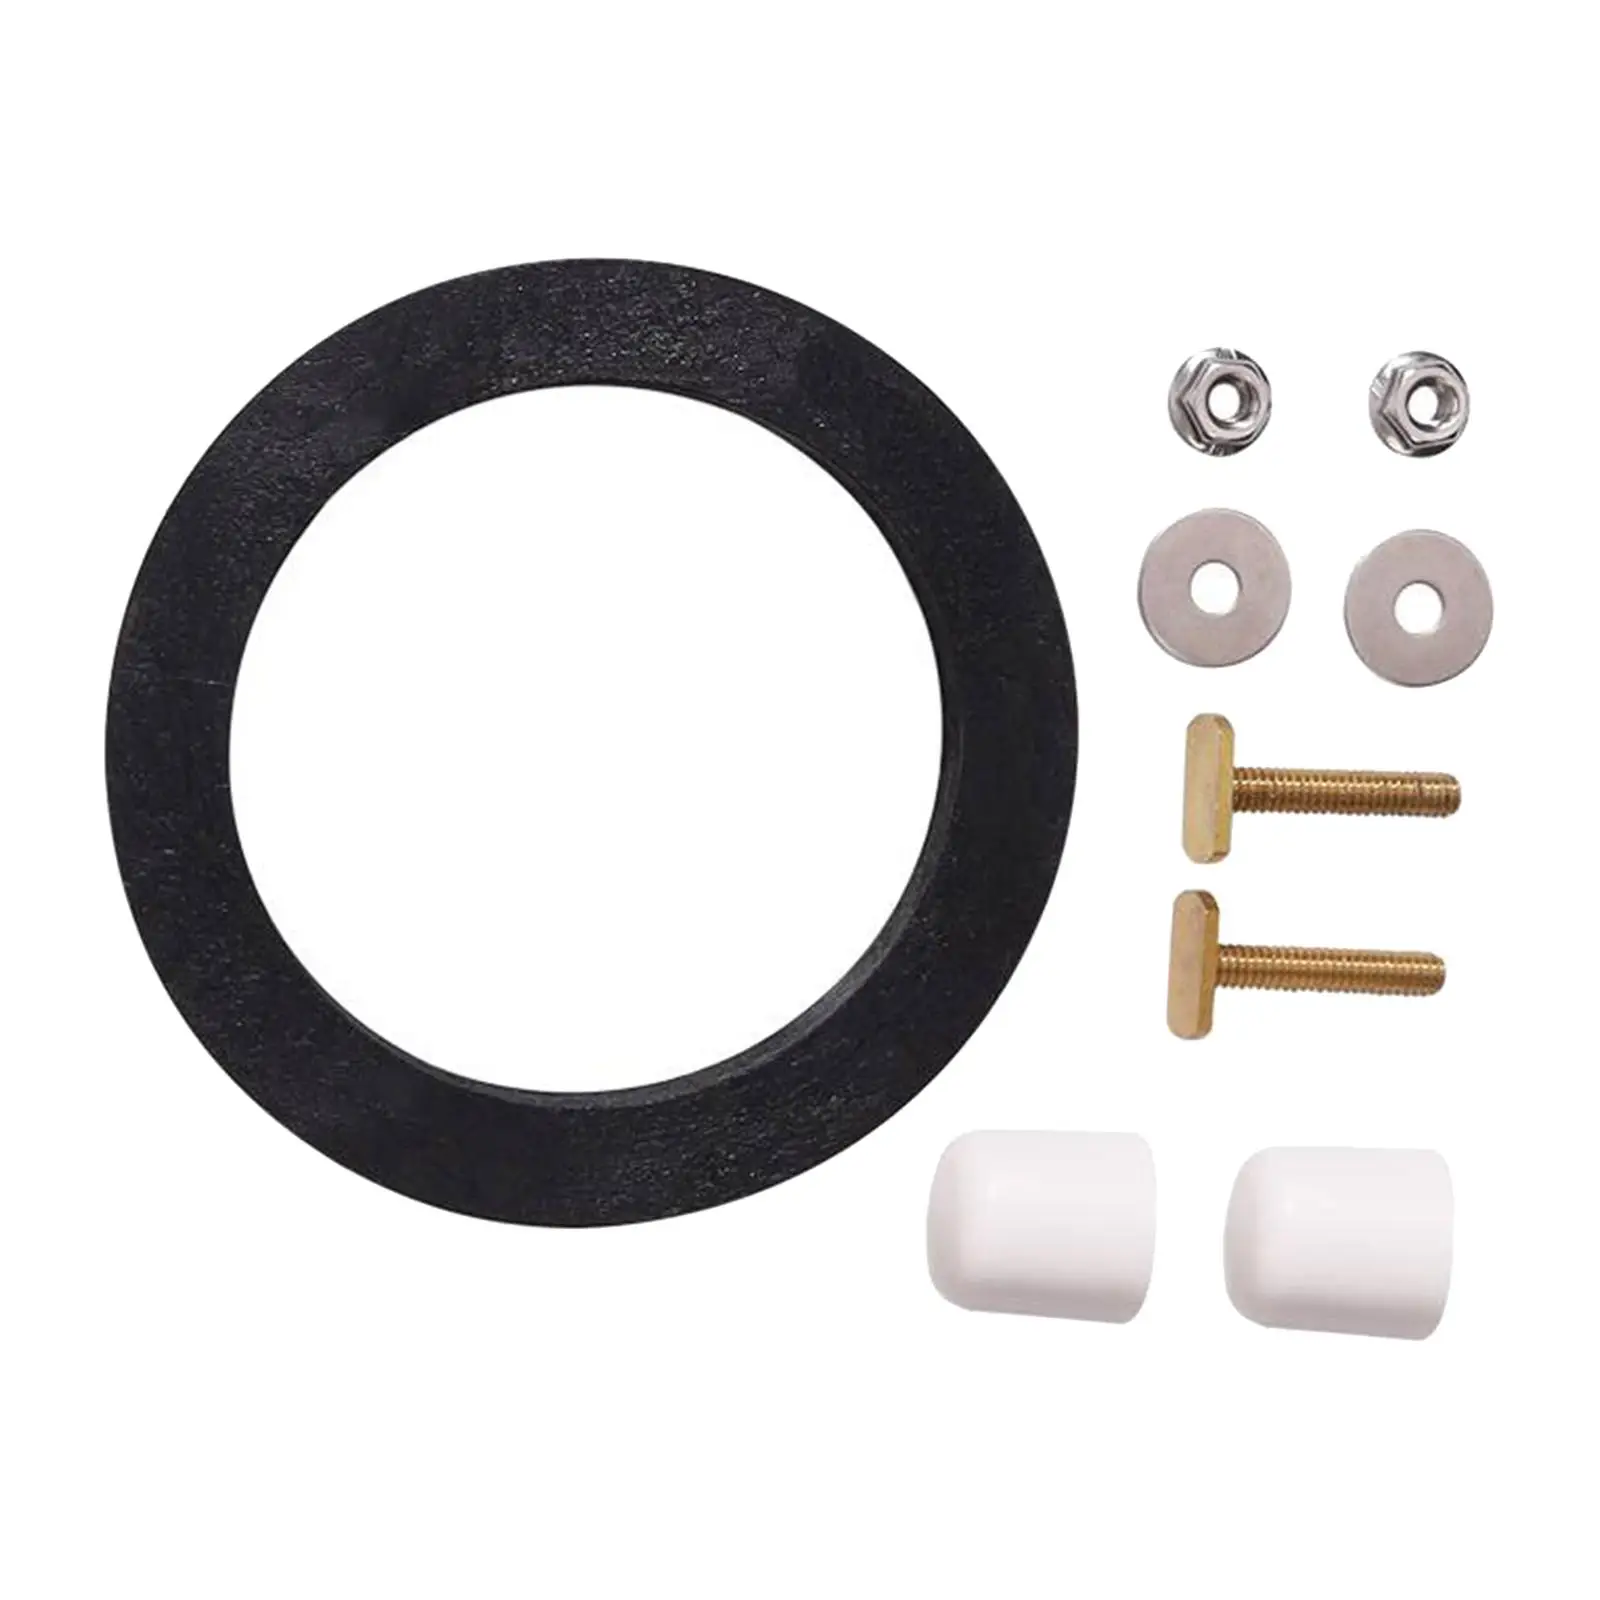 RV Toilet Seal Kit Mounting Hardware Replacement for Dometic 300 Series